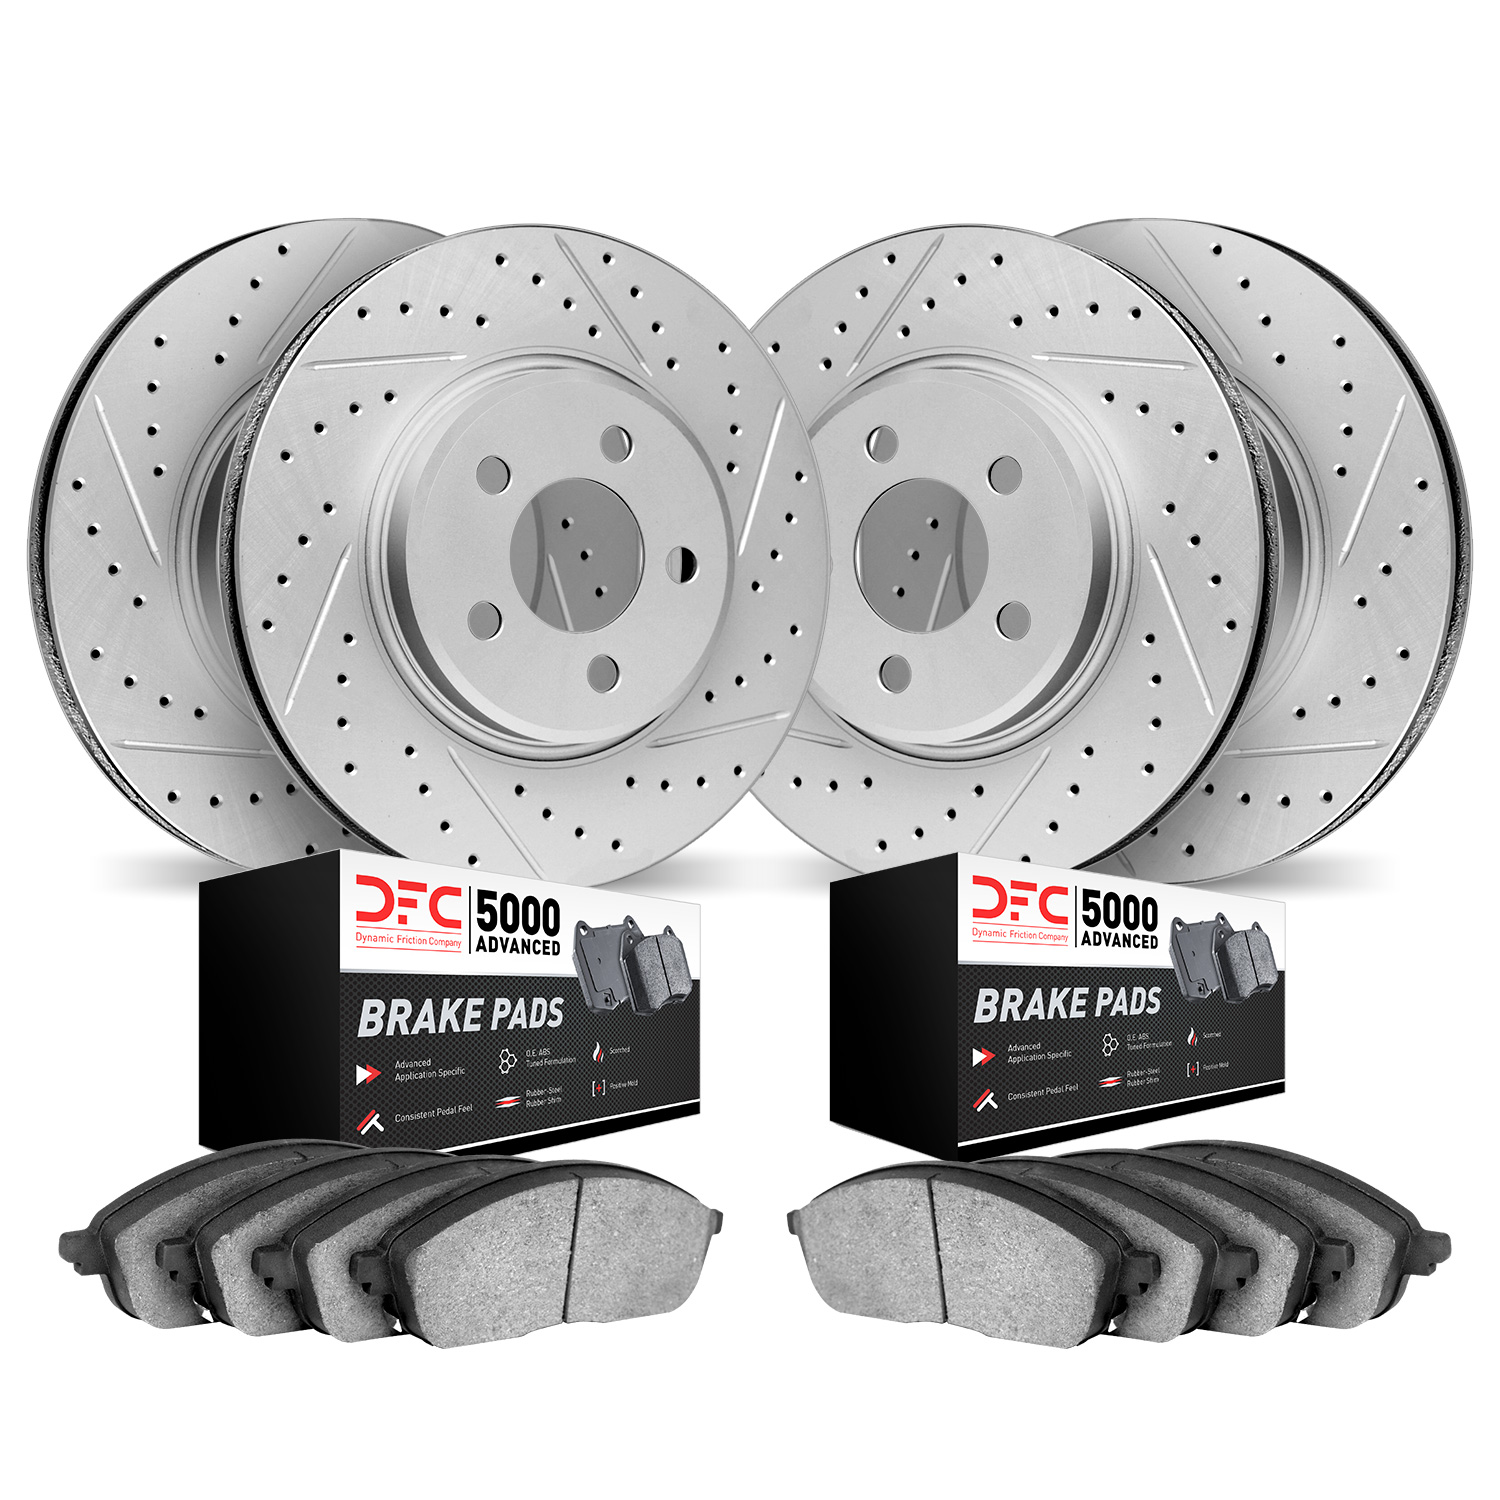 2504-31070 Geoperformance Drilled/Slotted Rotors w/5000 Advanced Brake Pads Kit, 2014-2019 BMW, Position: Front and Rear